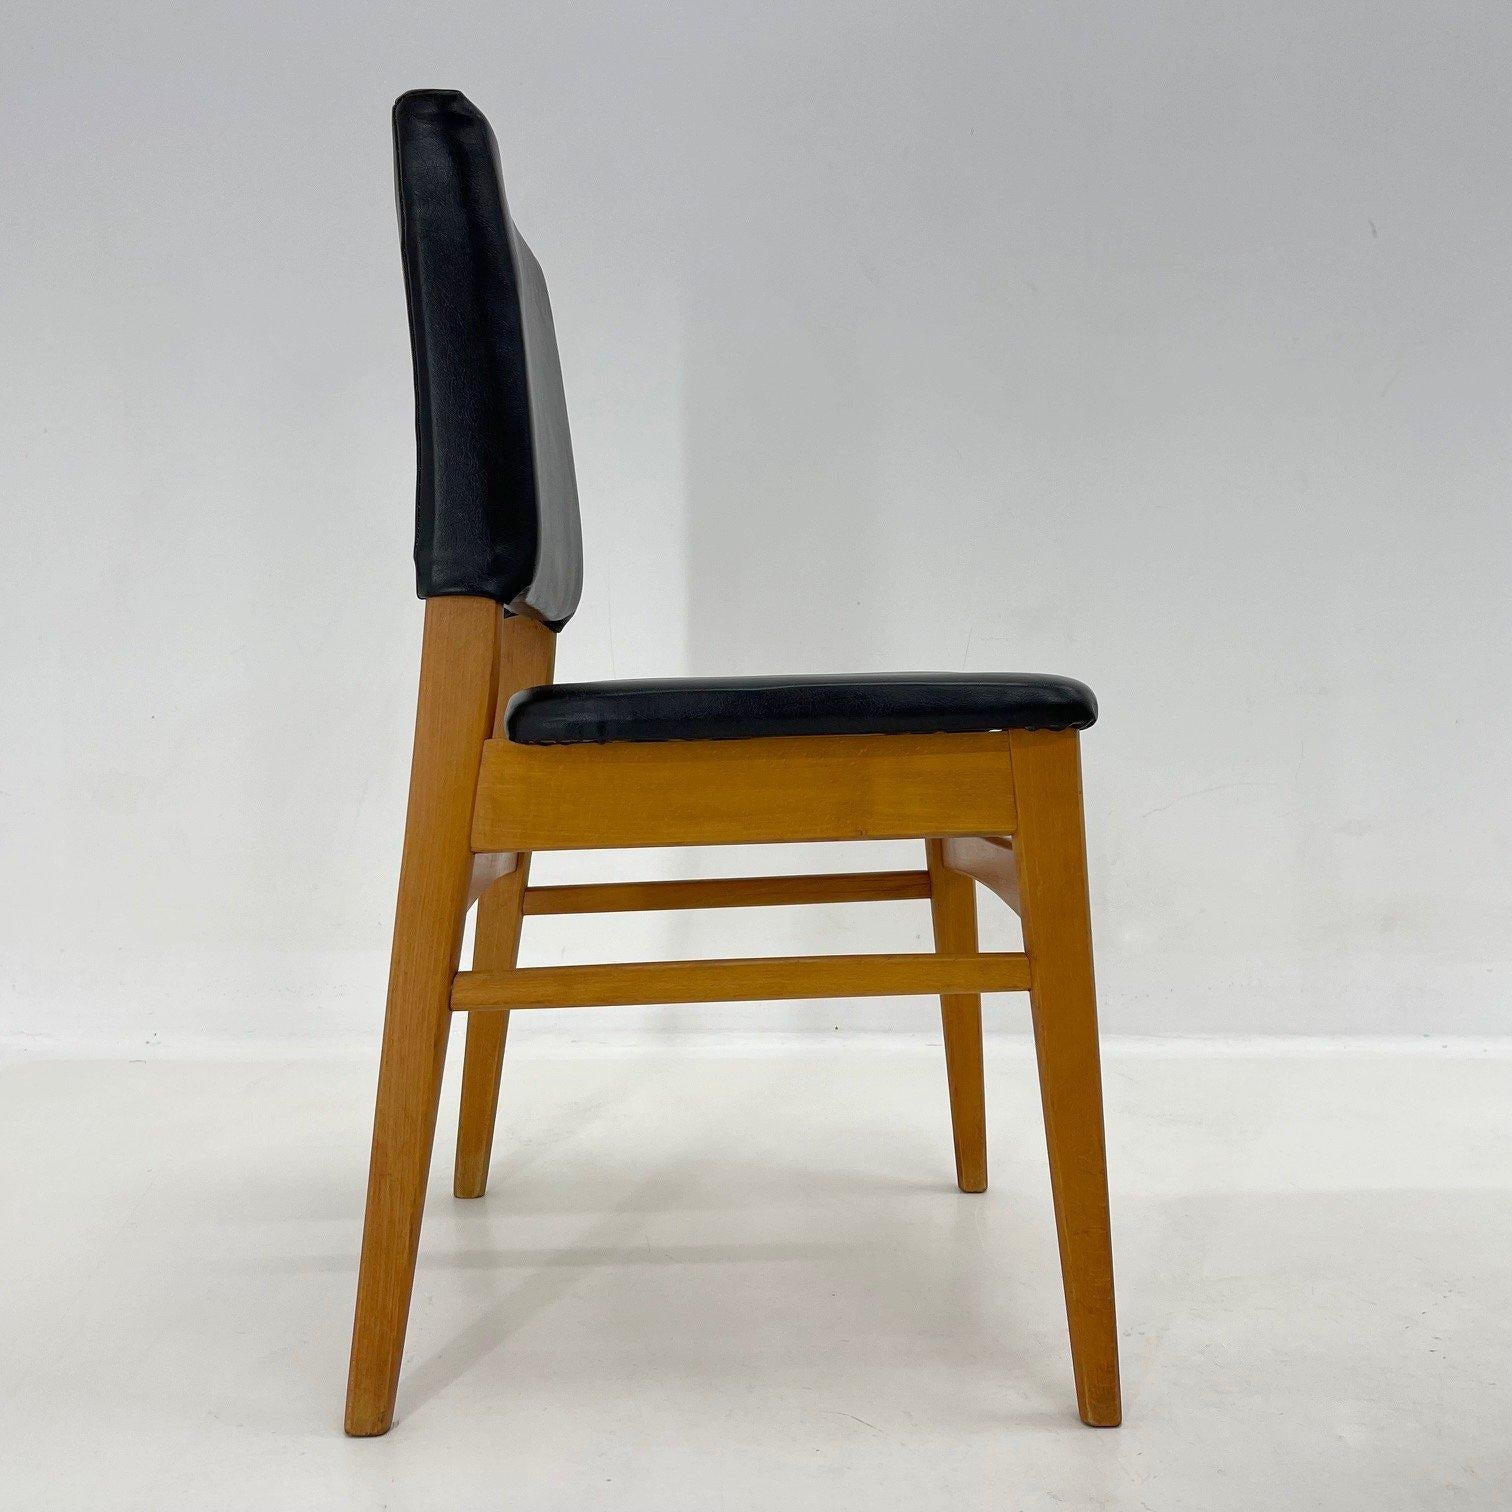 Set of 6 Leatherette & Wood Chairs, Czechoslovakia, 1960's For Sale 2